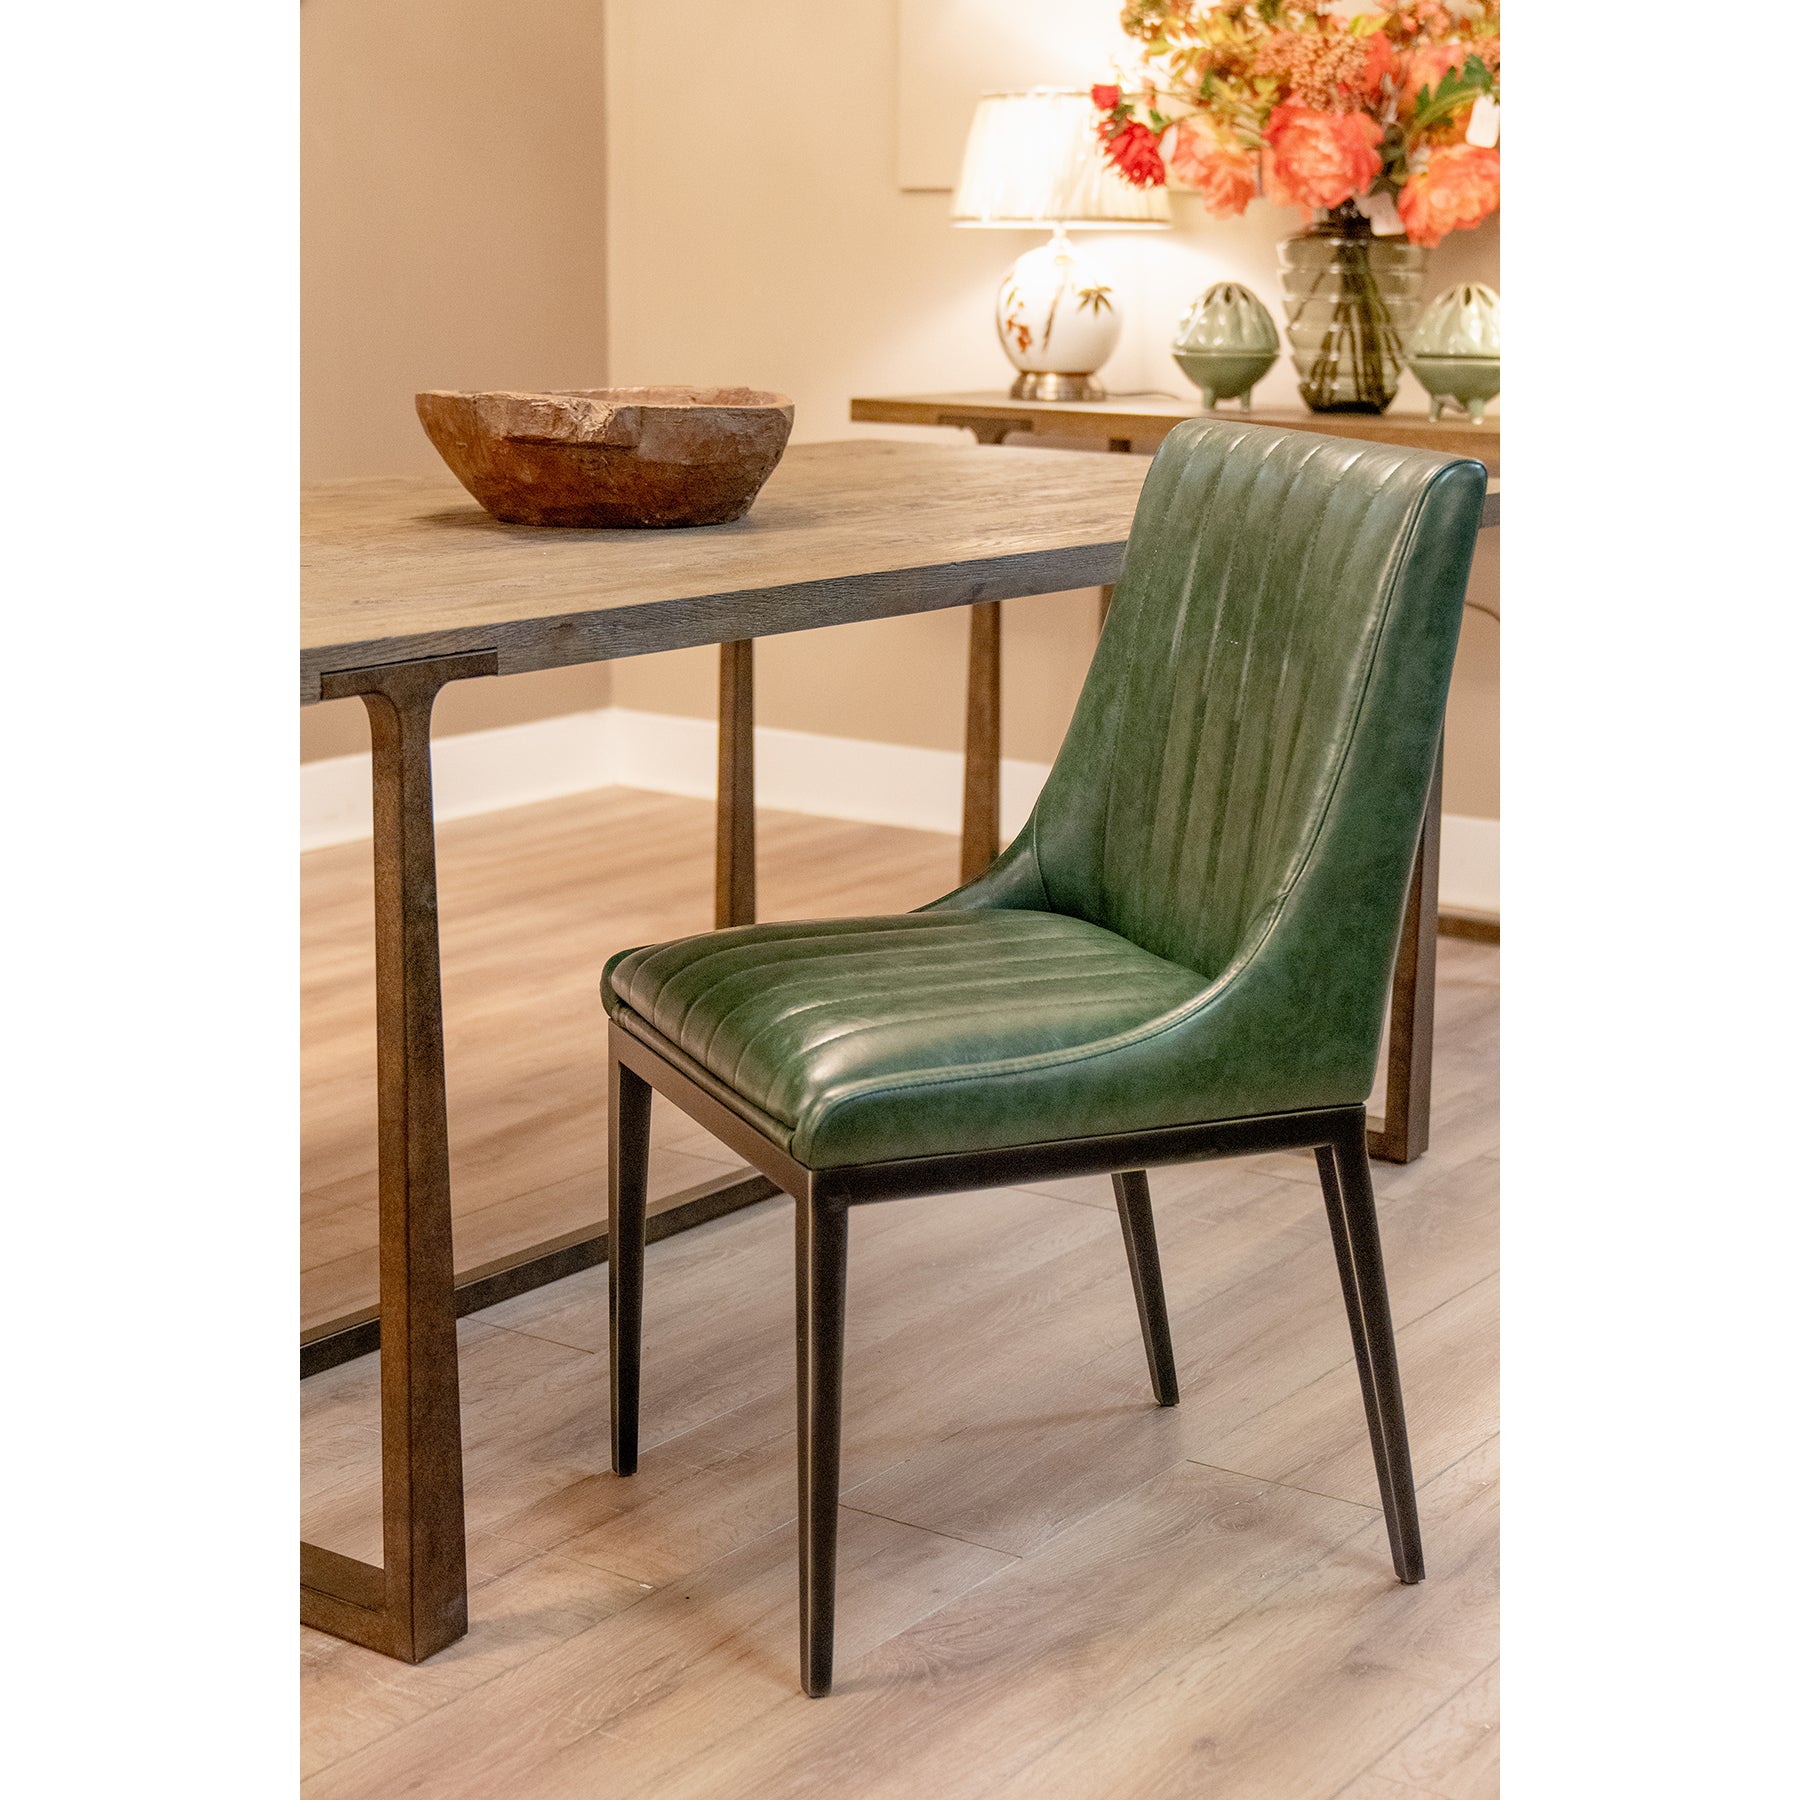 Tuscon Green Dining Chair